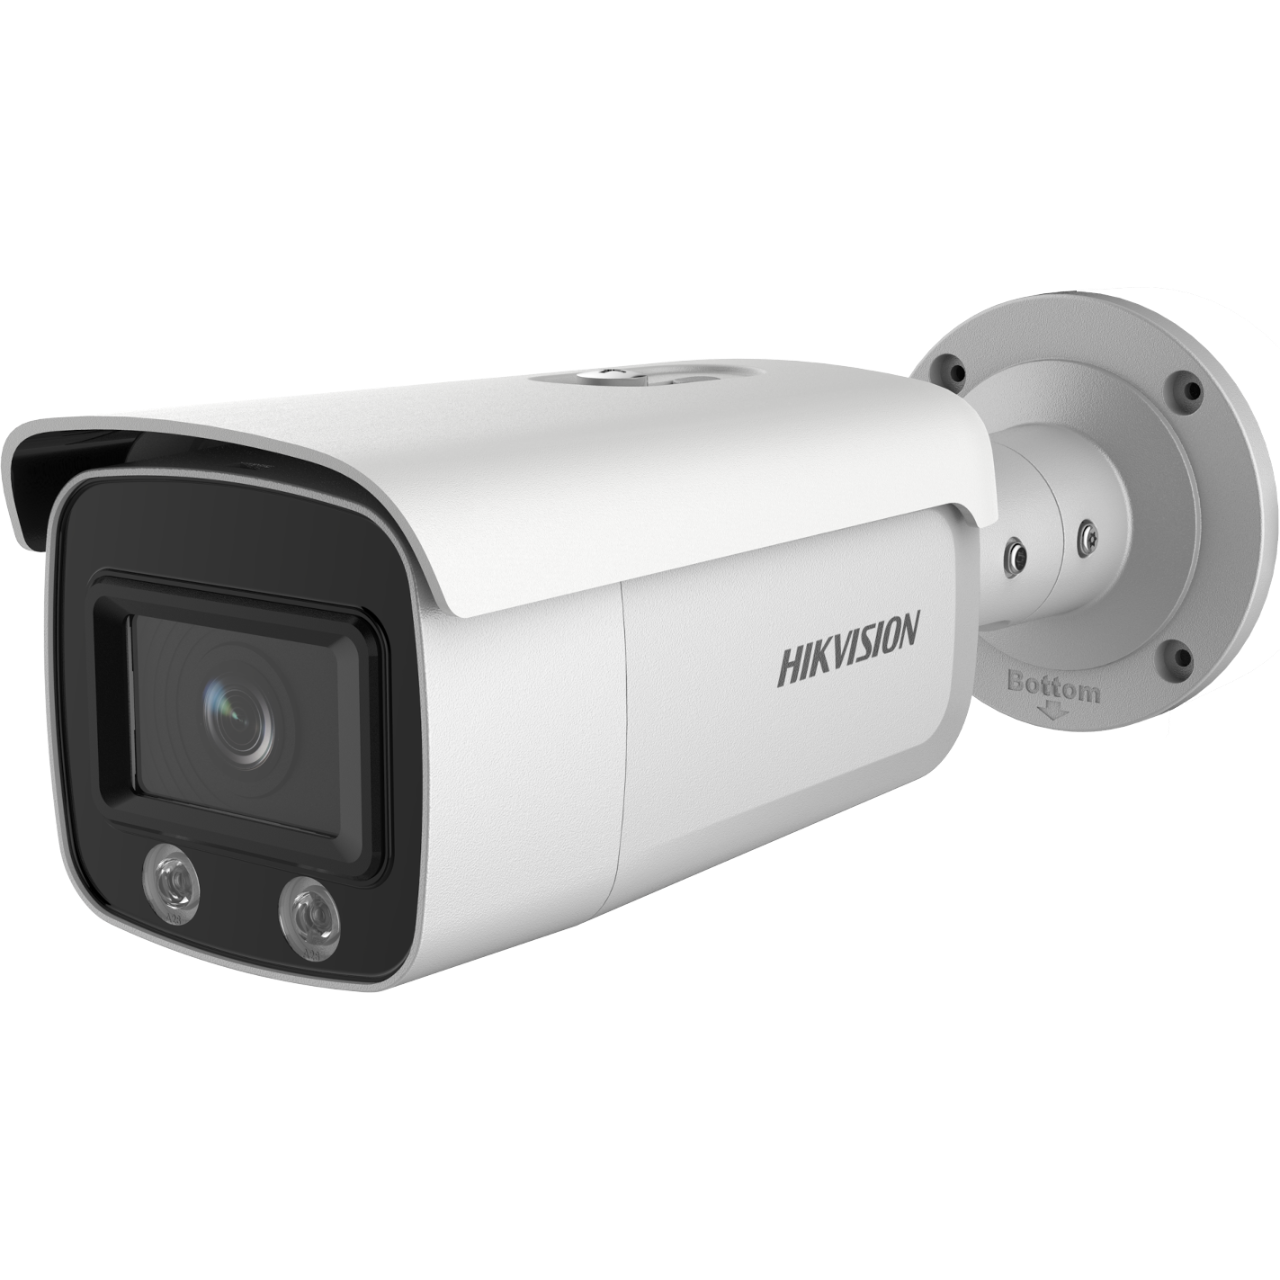 Hikvision DS-2CD1047G0-L 4 MP ColorVu Fixed Bullet Network Camera in Bangladesh